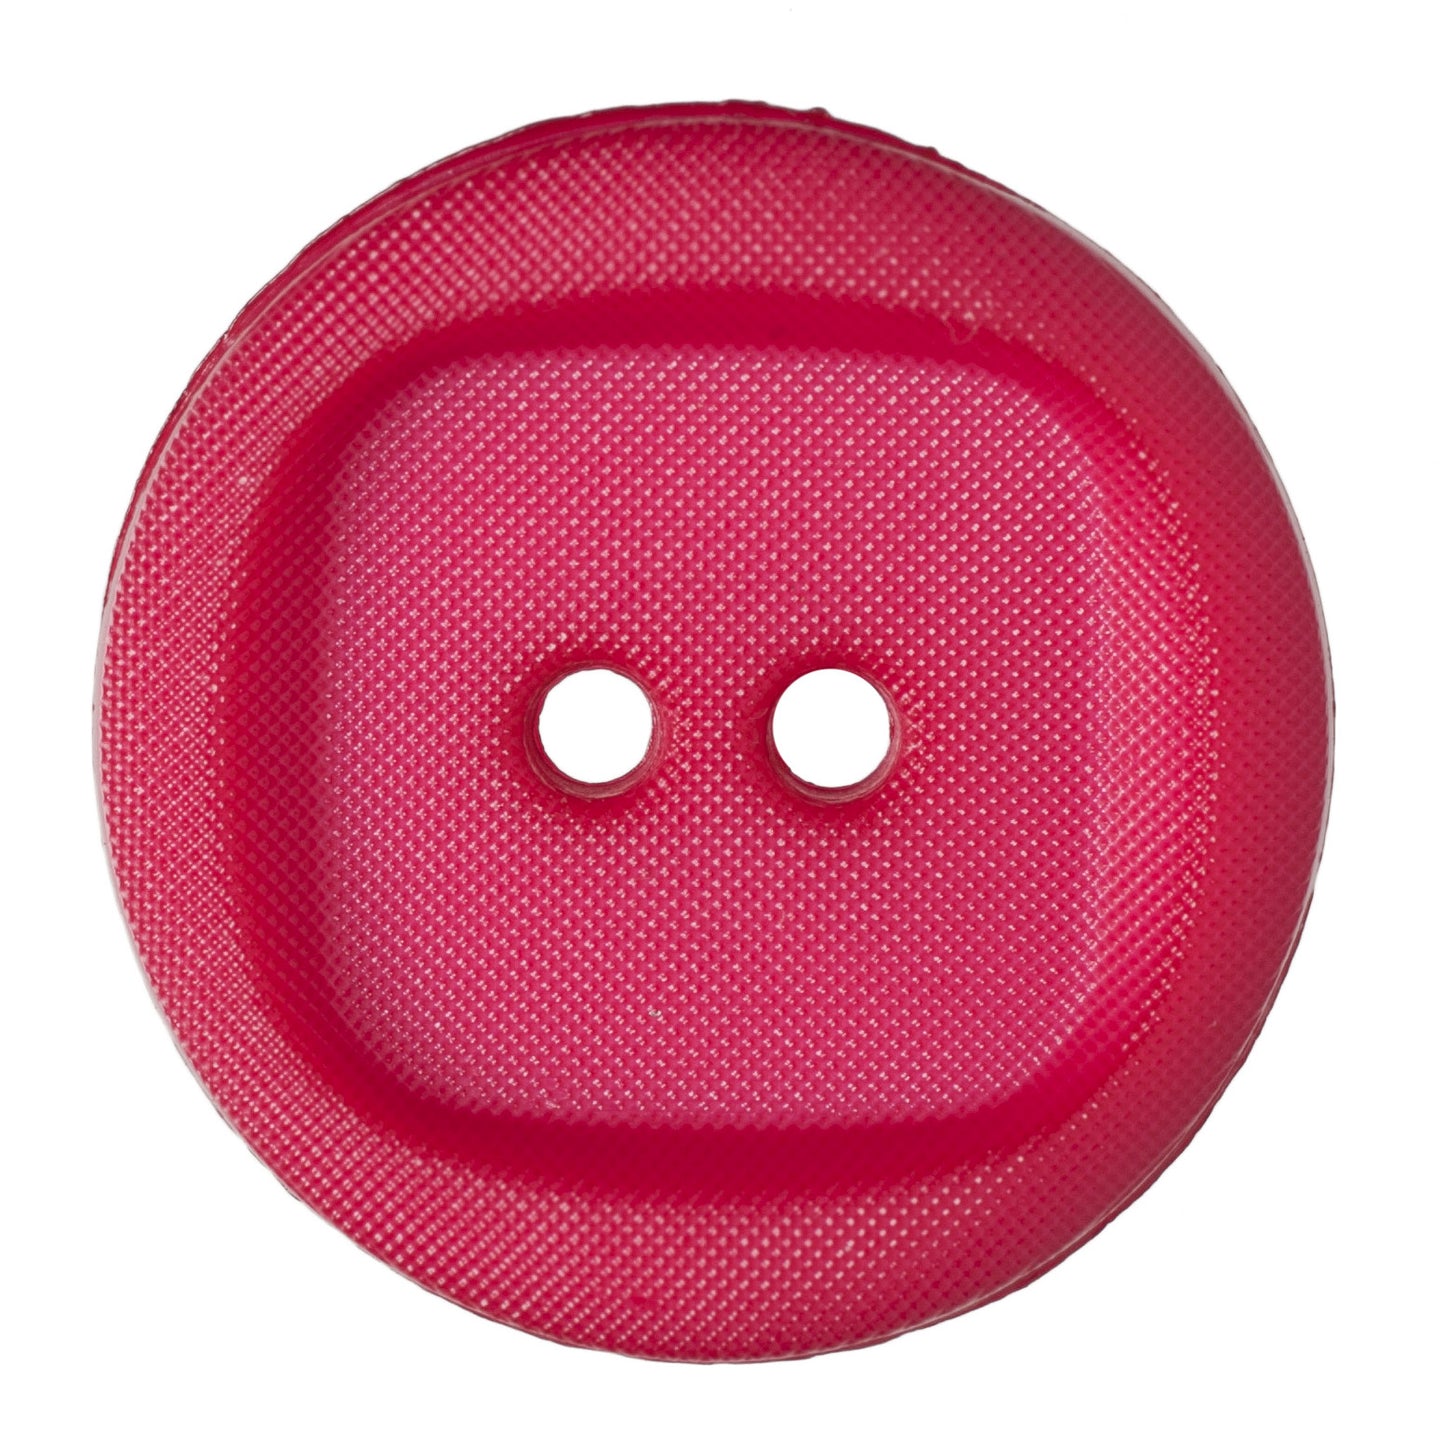 2 Hole Wavy with Square Insert Button - 20mm - Cerise [LD6.5]